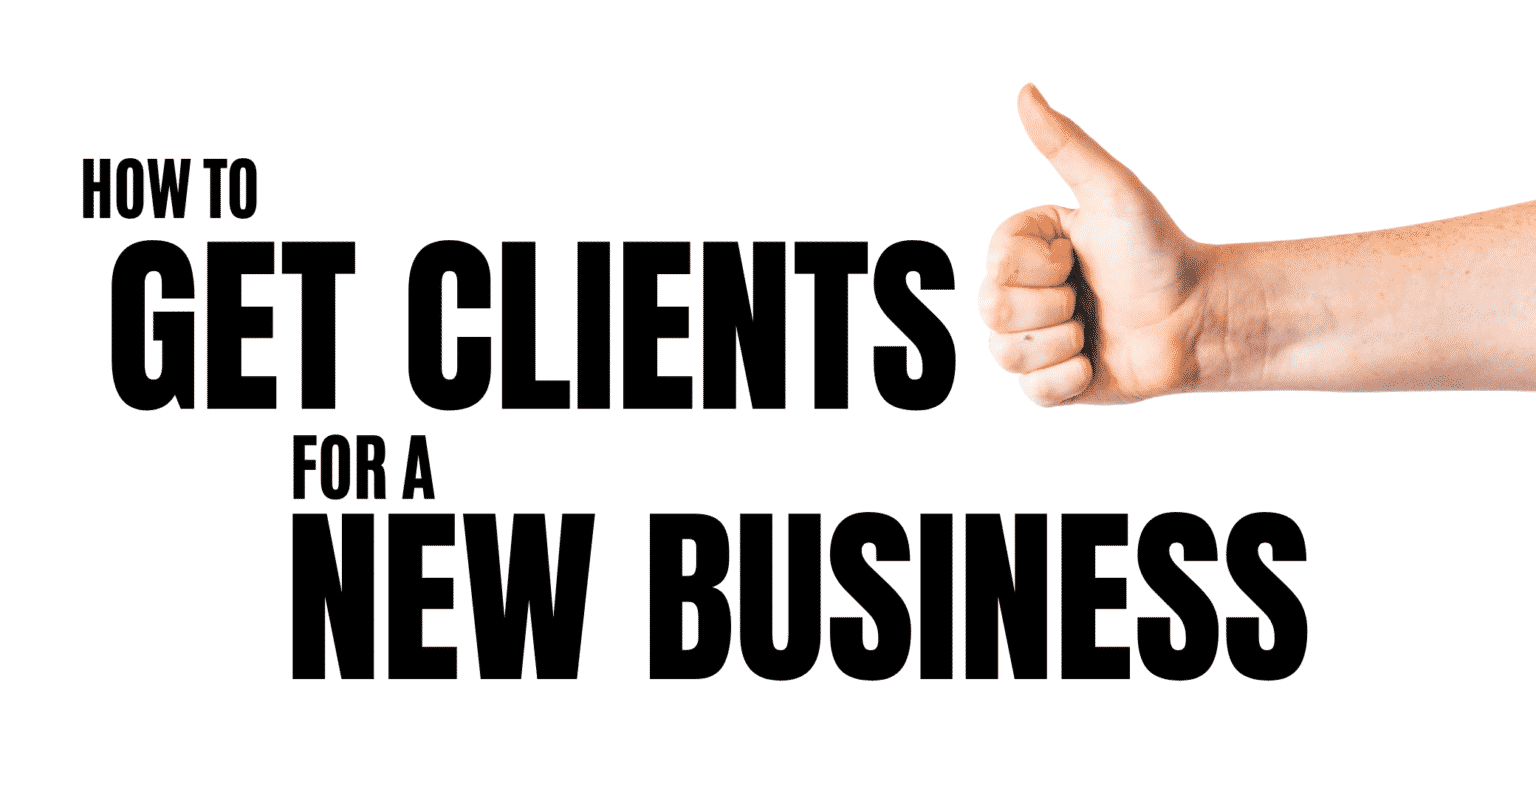 How to Get Clients For a New Business - Maverrik